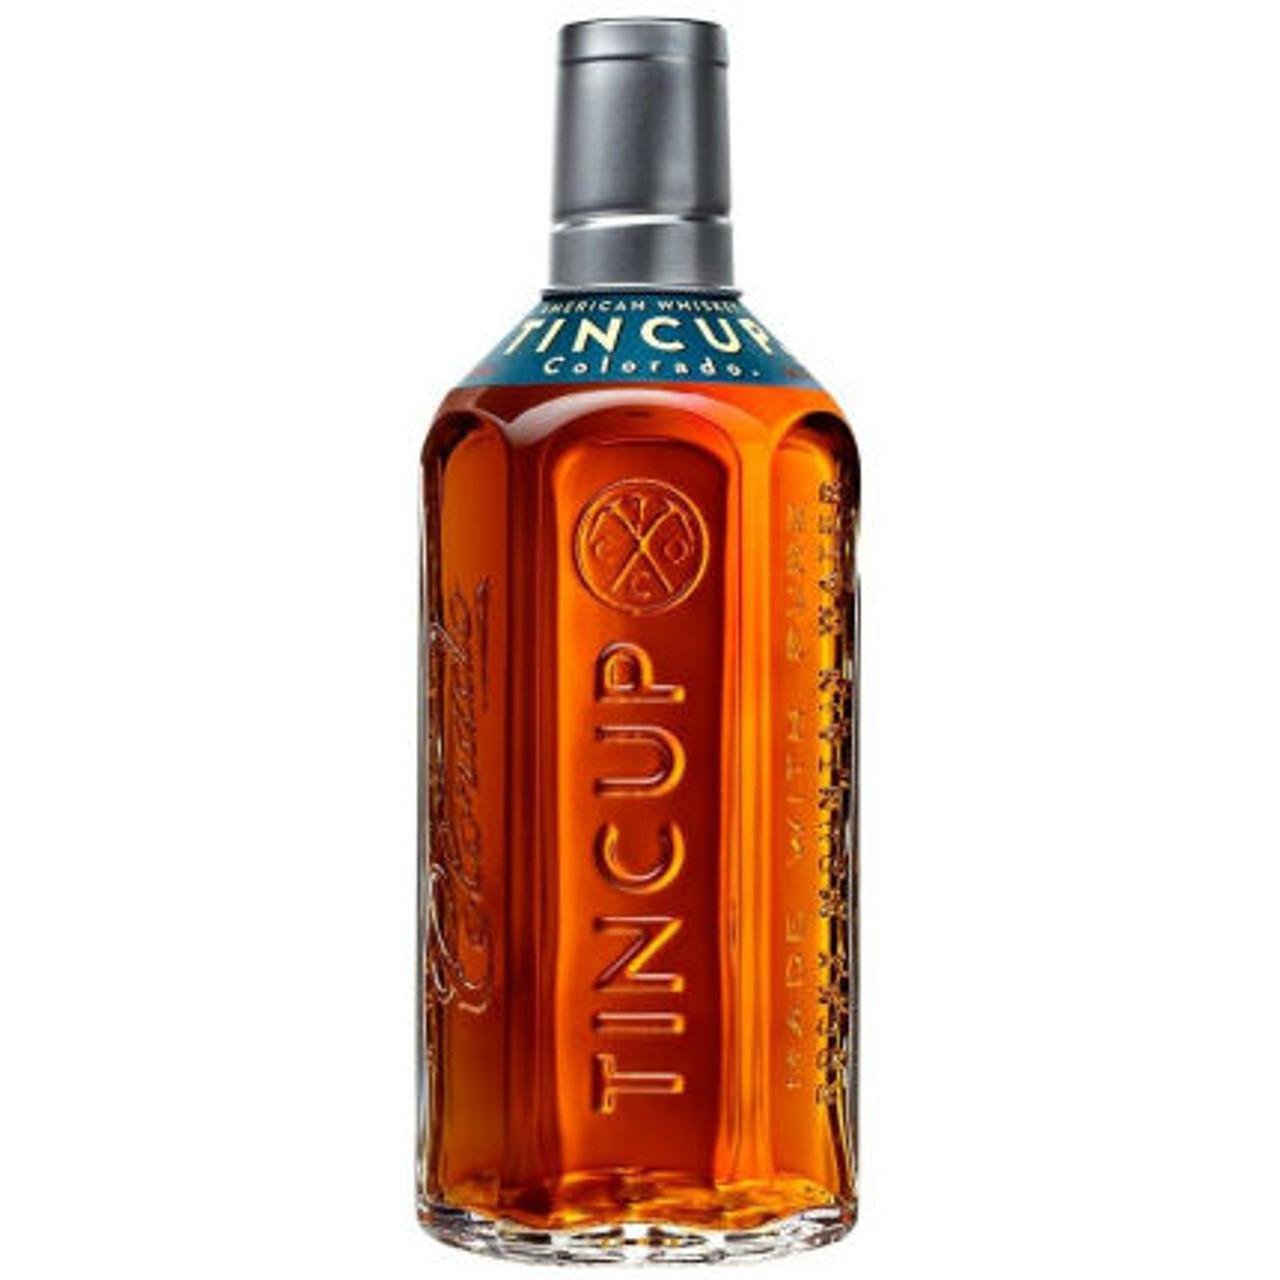 TINCUP - Colorado American Whiskey (750ML) - The Epicurean Trader